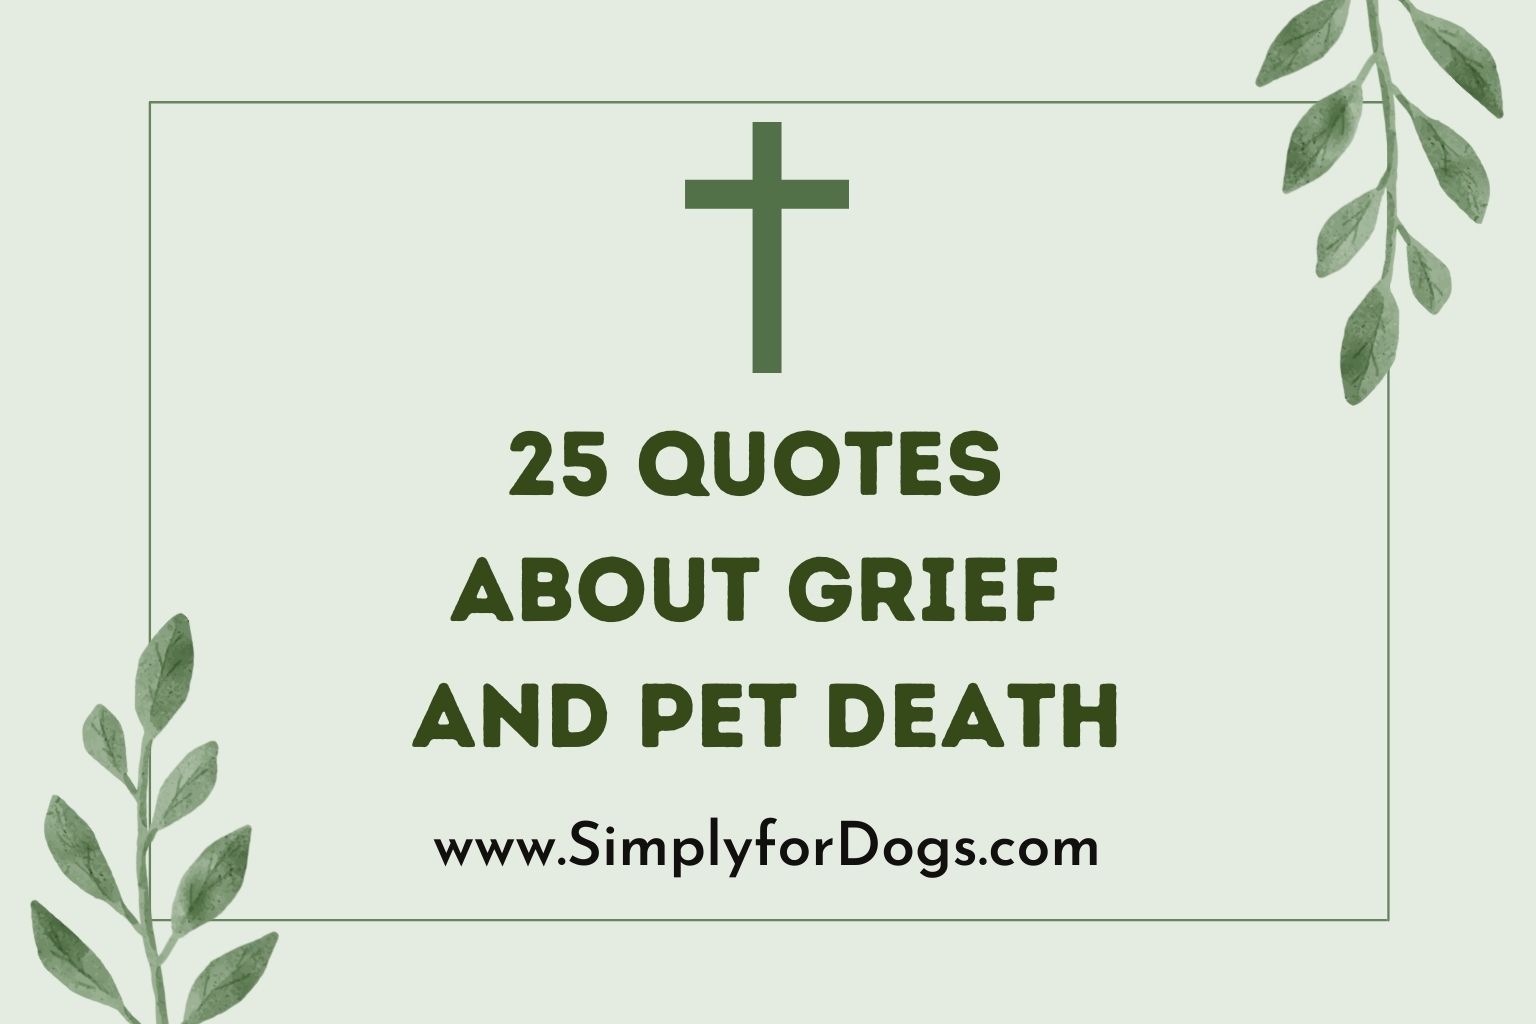 25 Quotes About Grief and Pet Death